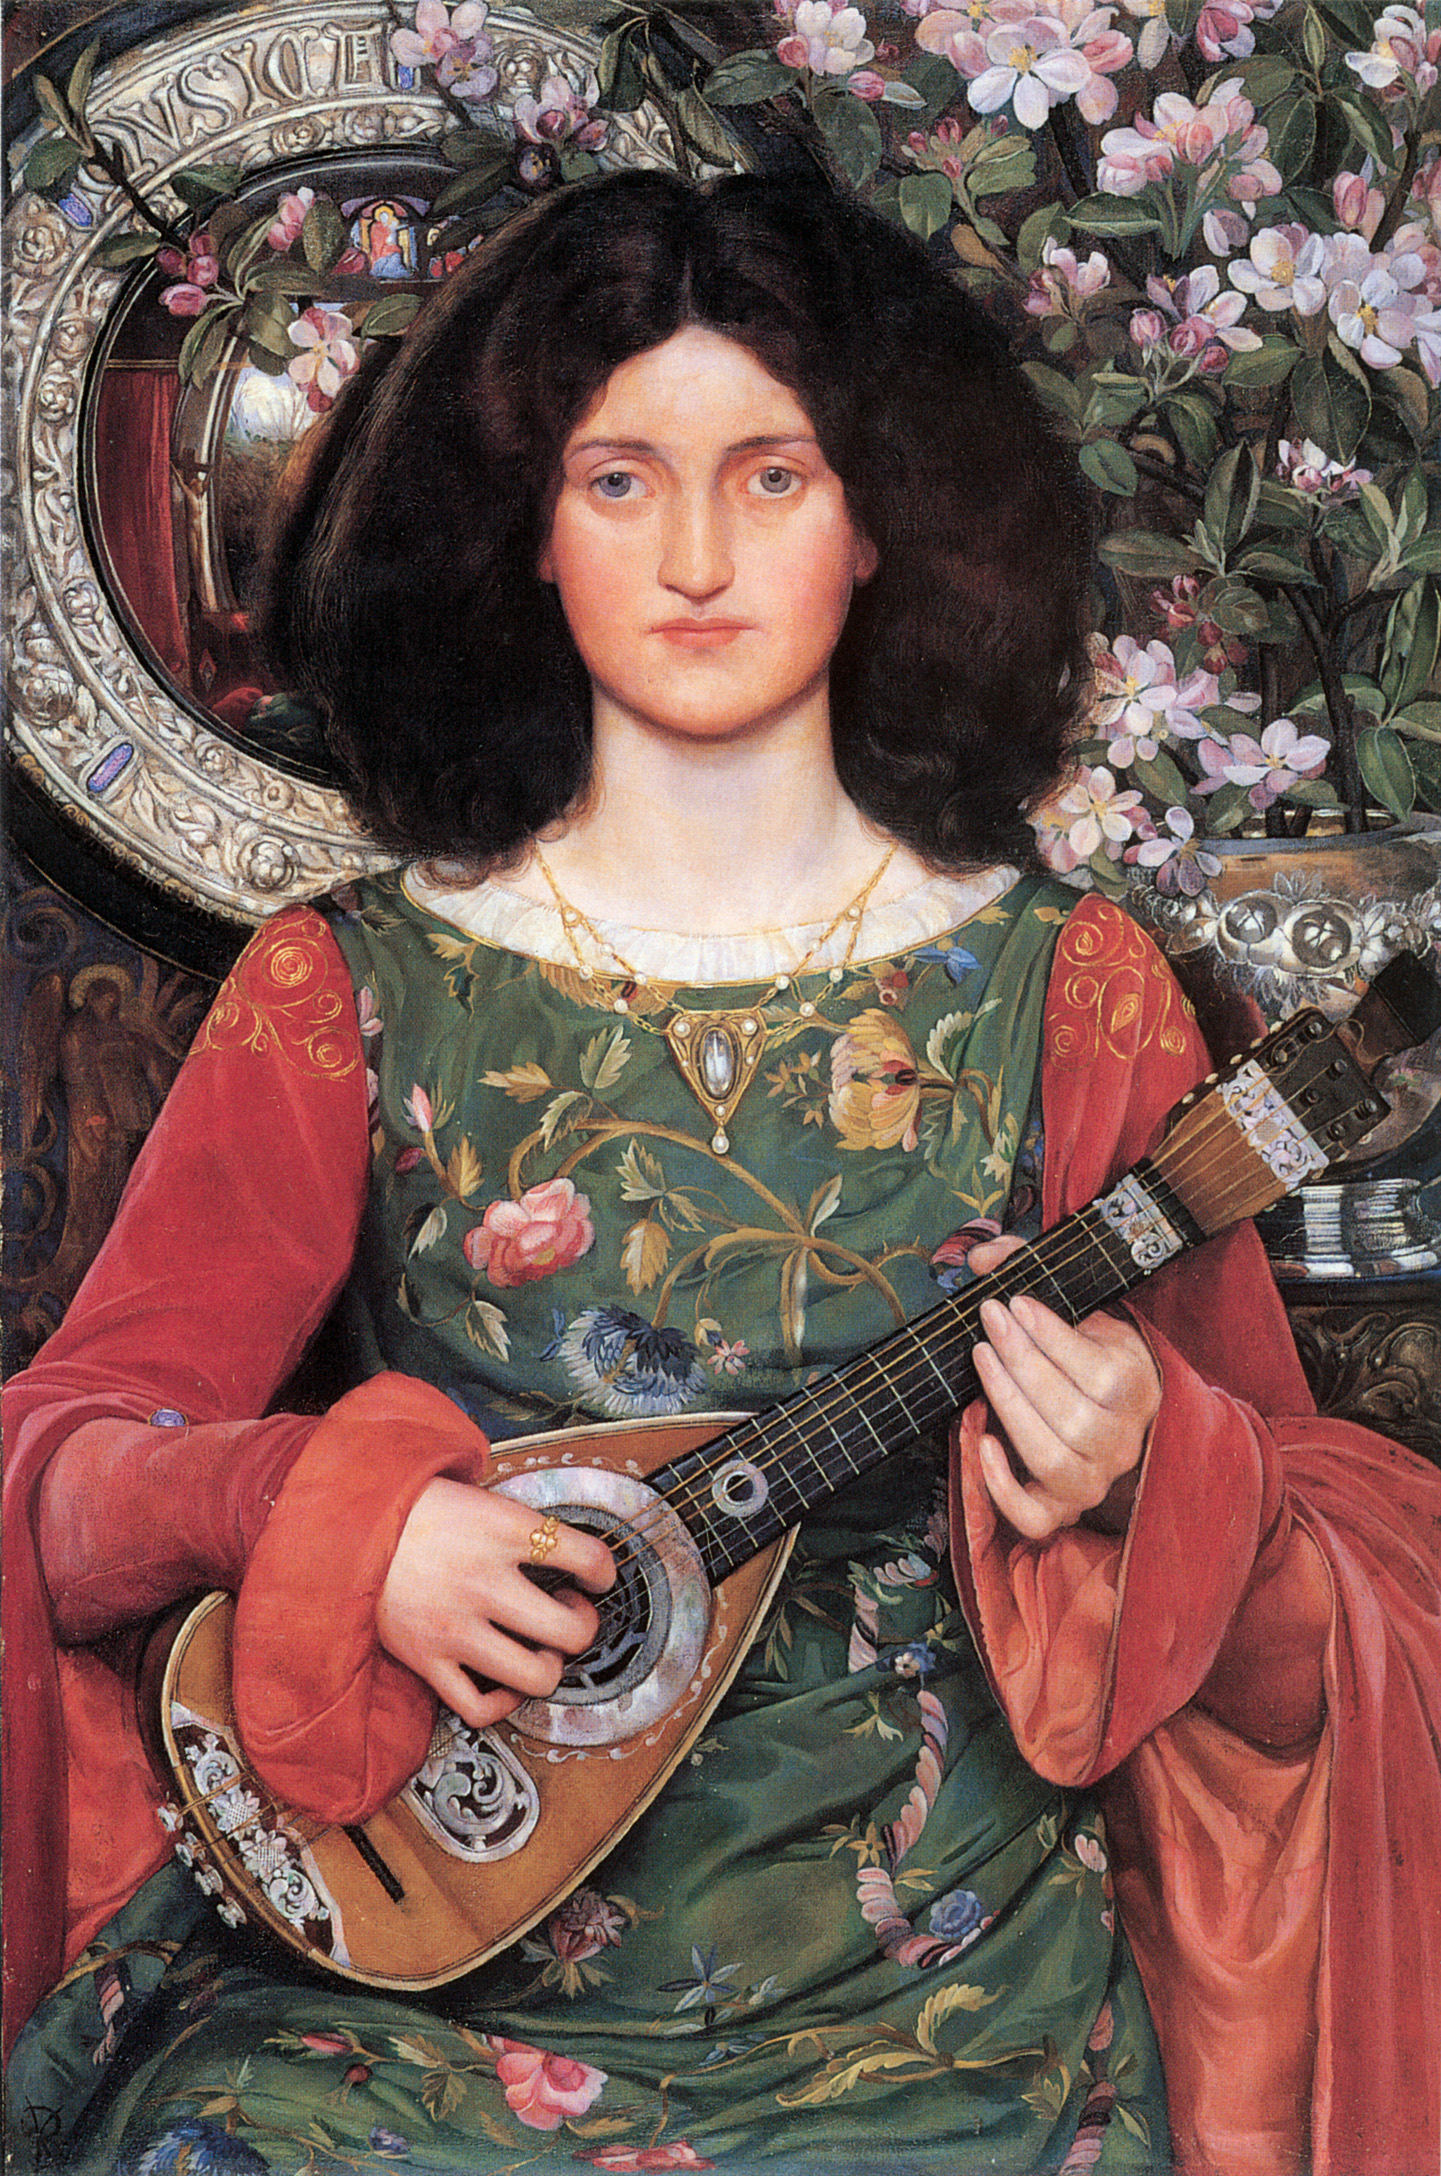 A woman playing a stringed instrument with a mirror and a vase of flowers behind her